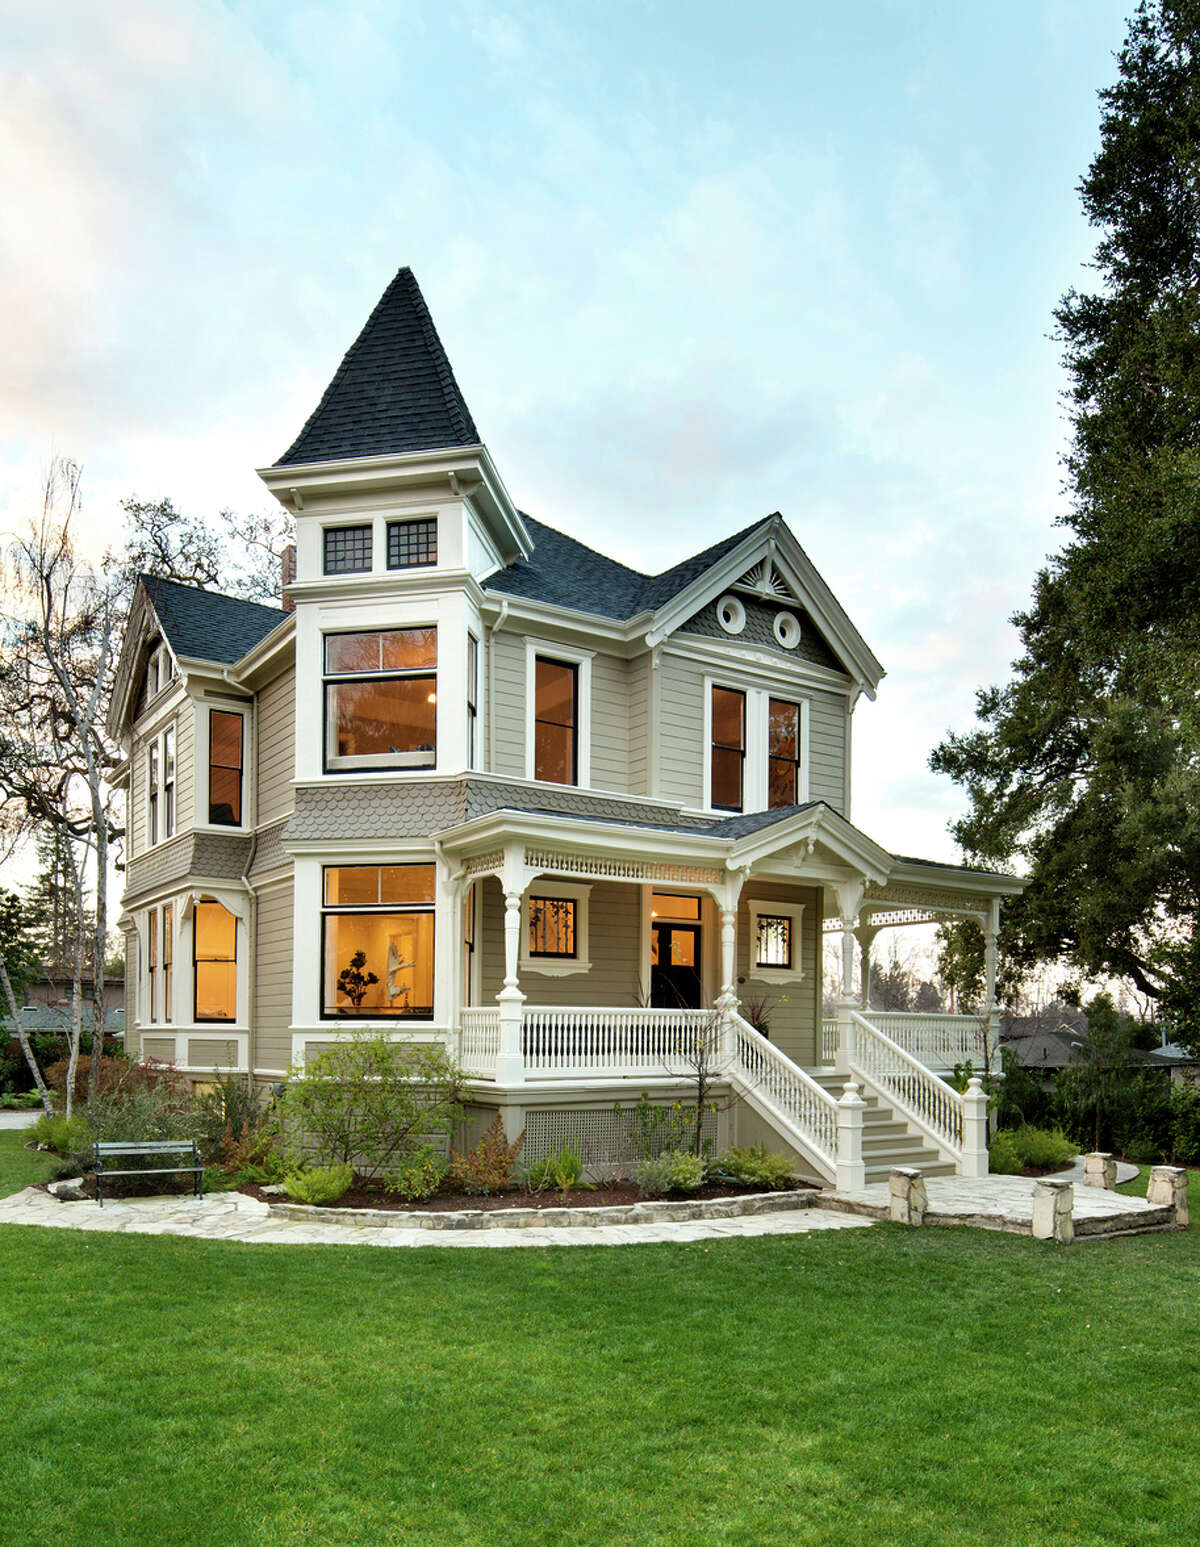 2275 Amherst St. in Palo Alto is a historic Queen Anne Victorian available for $4.88 million.